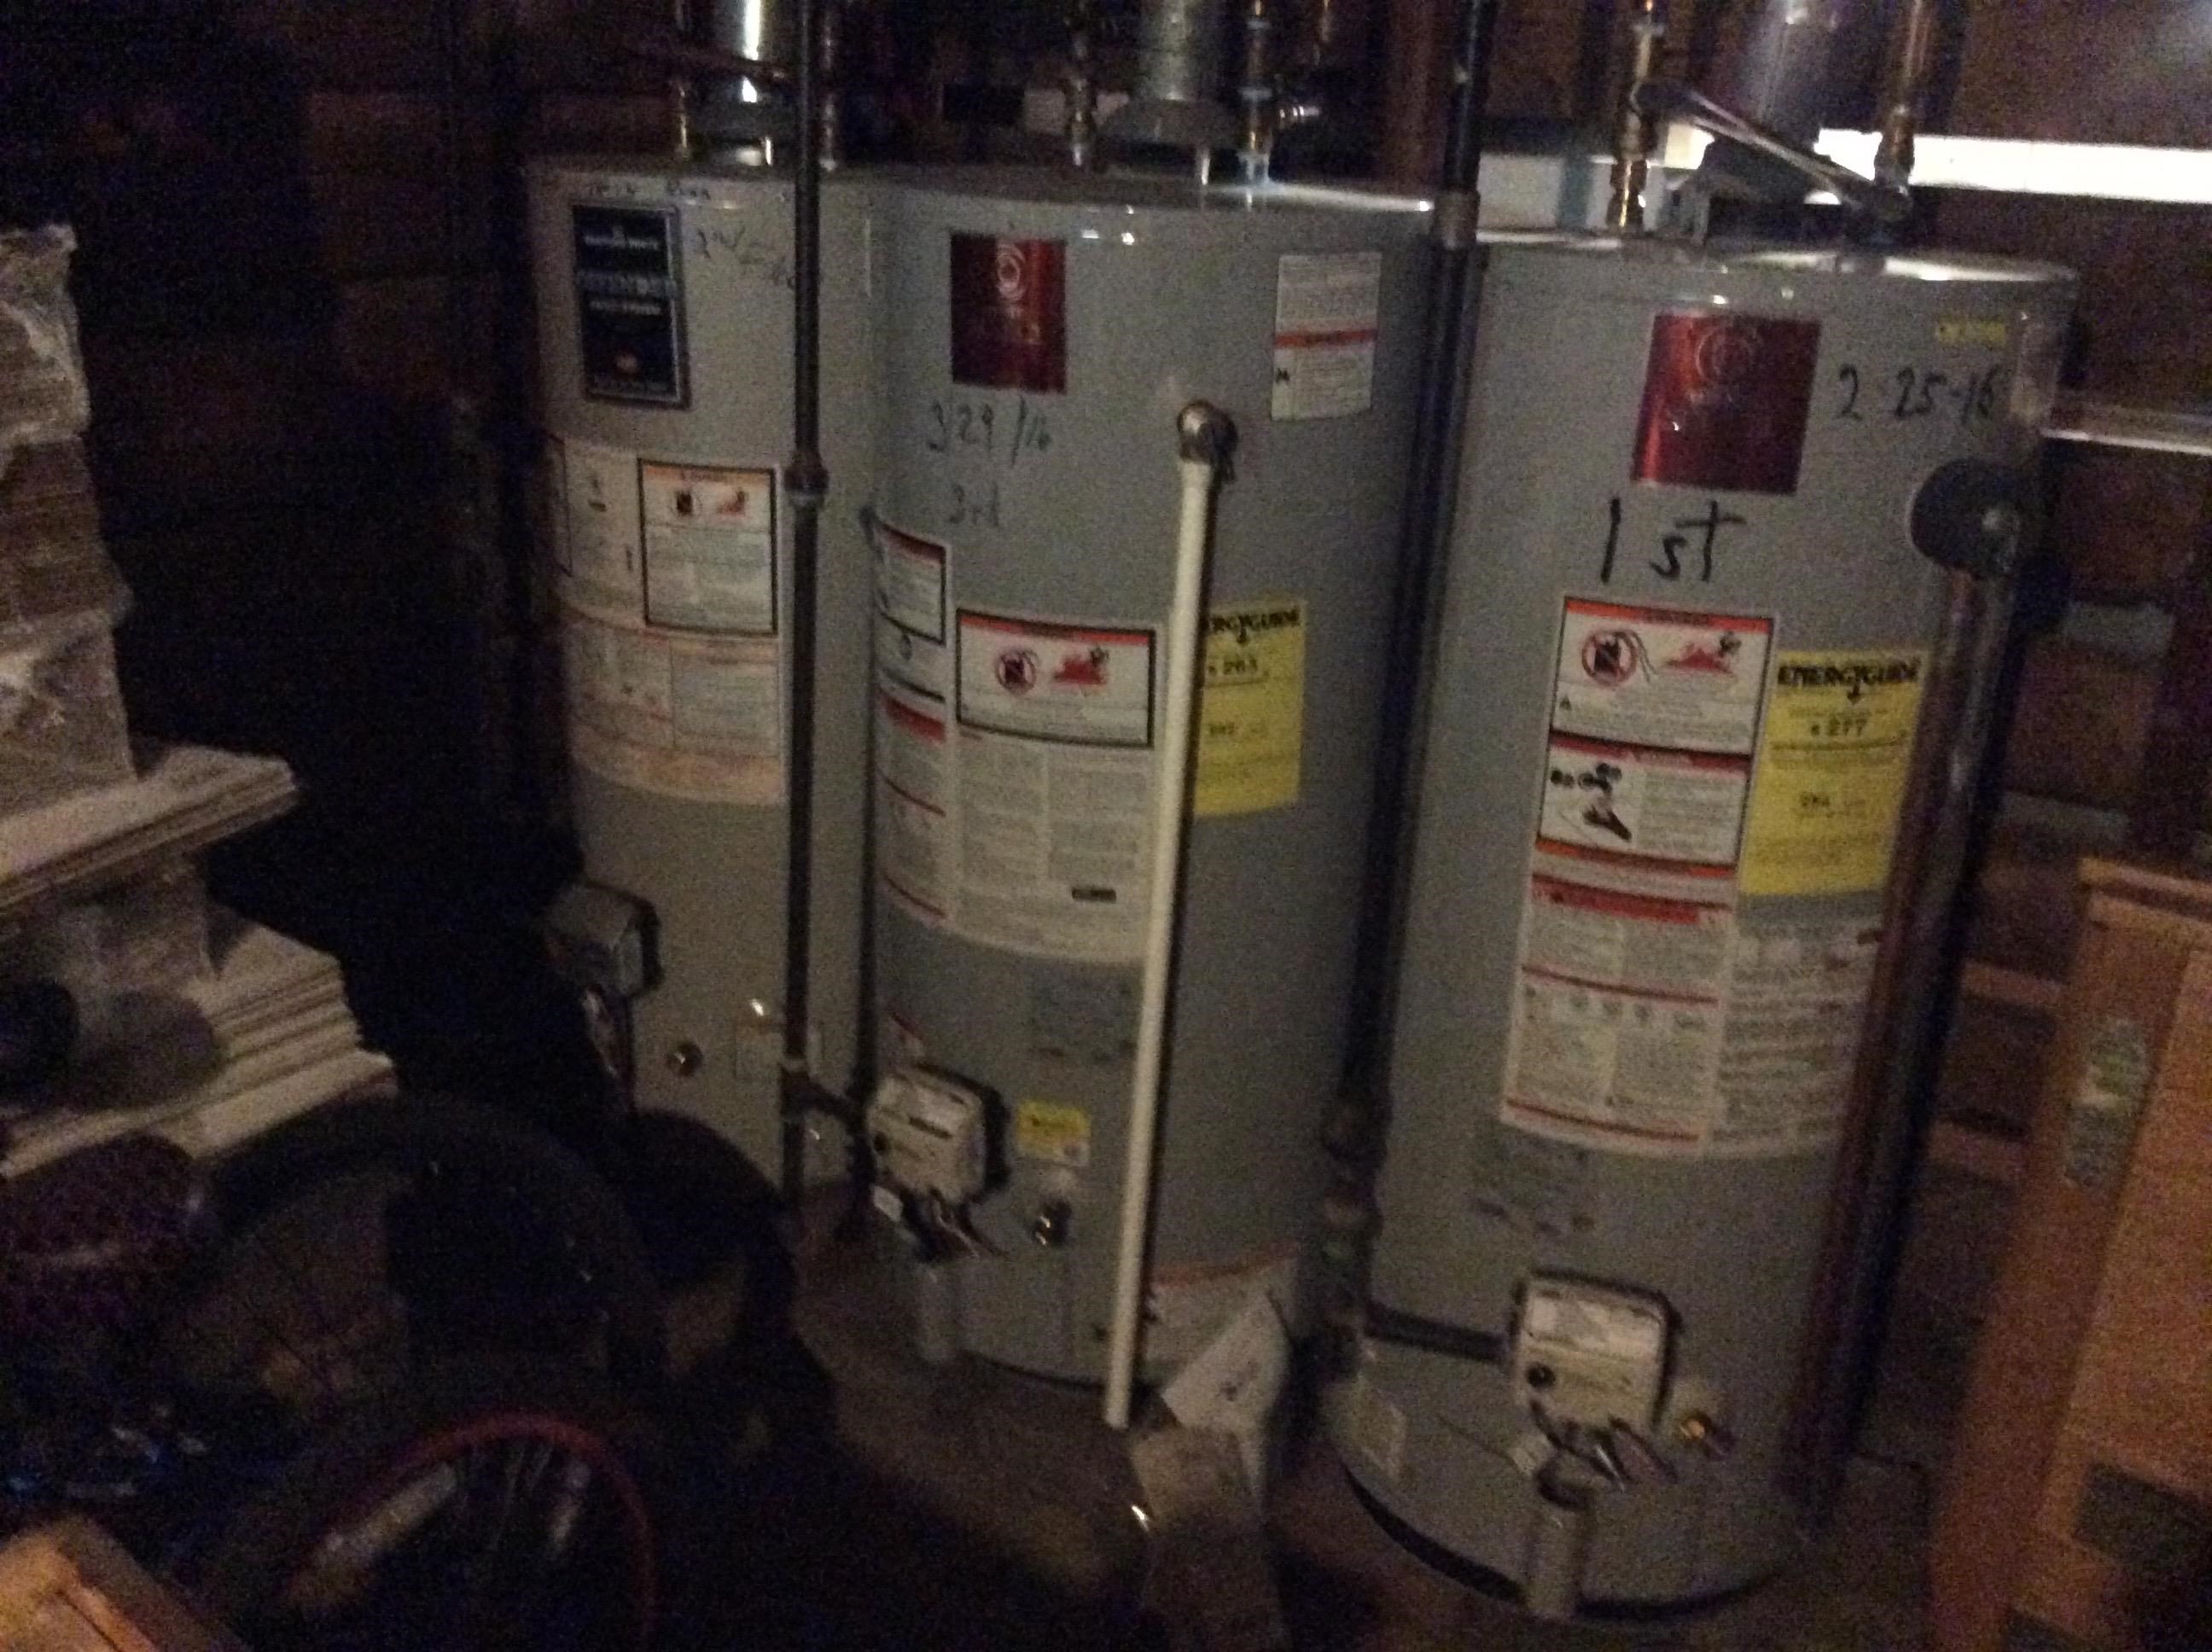 SEPERATE HOT WATER HEATERS